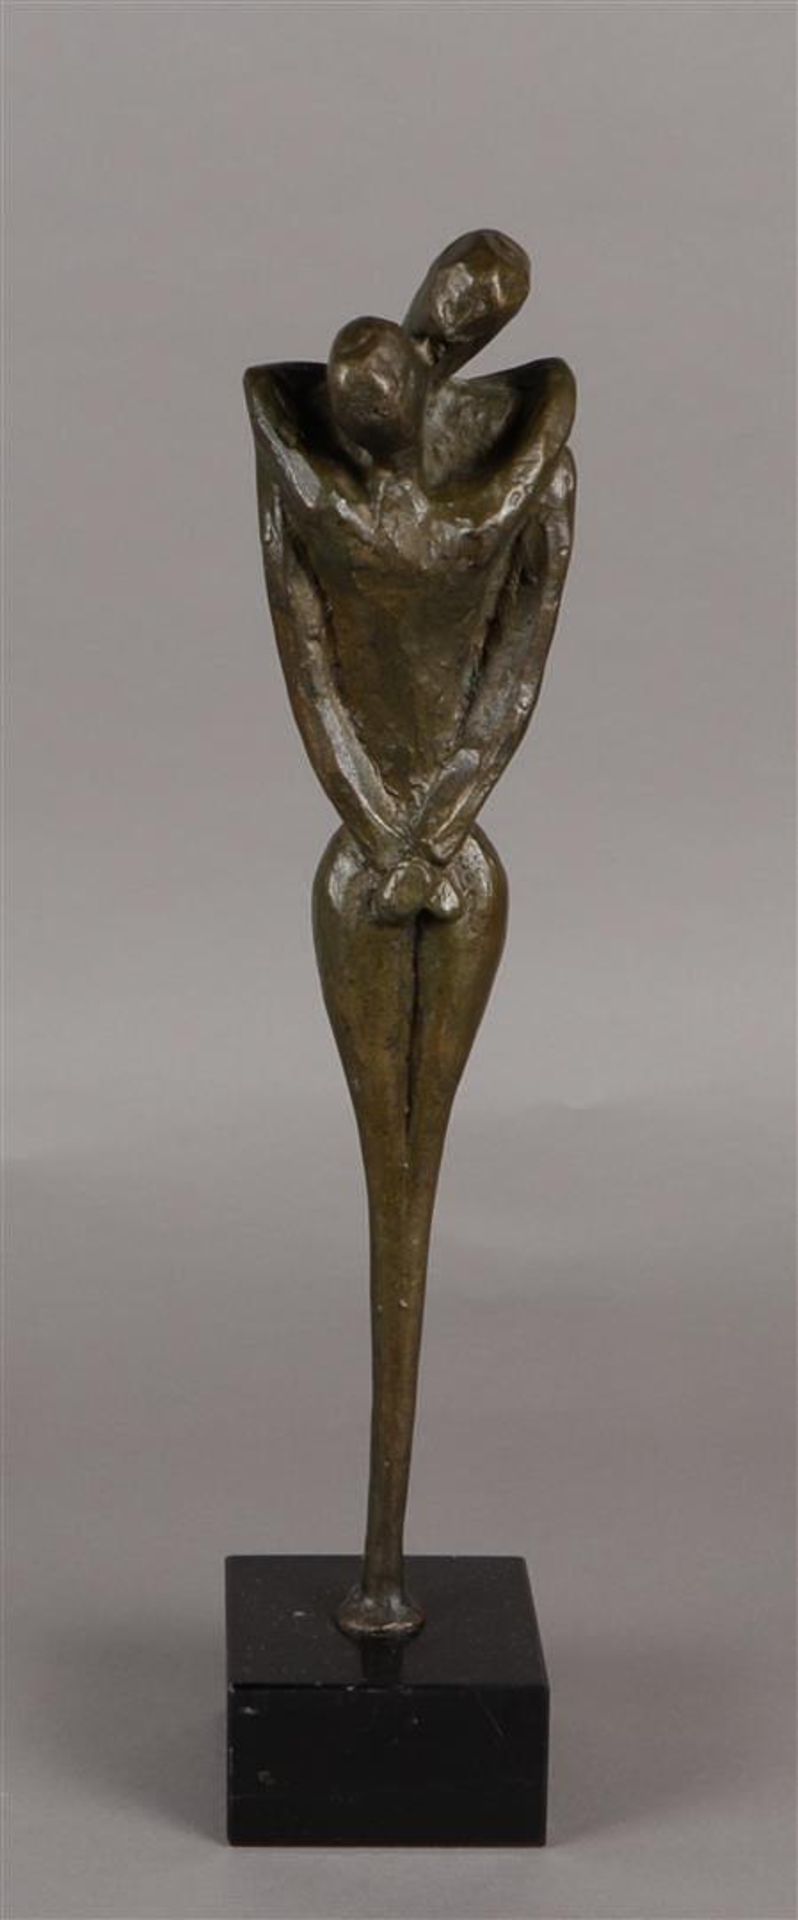 Jos Gielen (born Rotterdam 1952), Embrace, bronze on a honed marble base, including certificate.